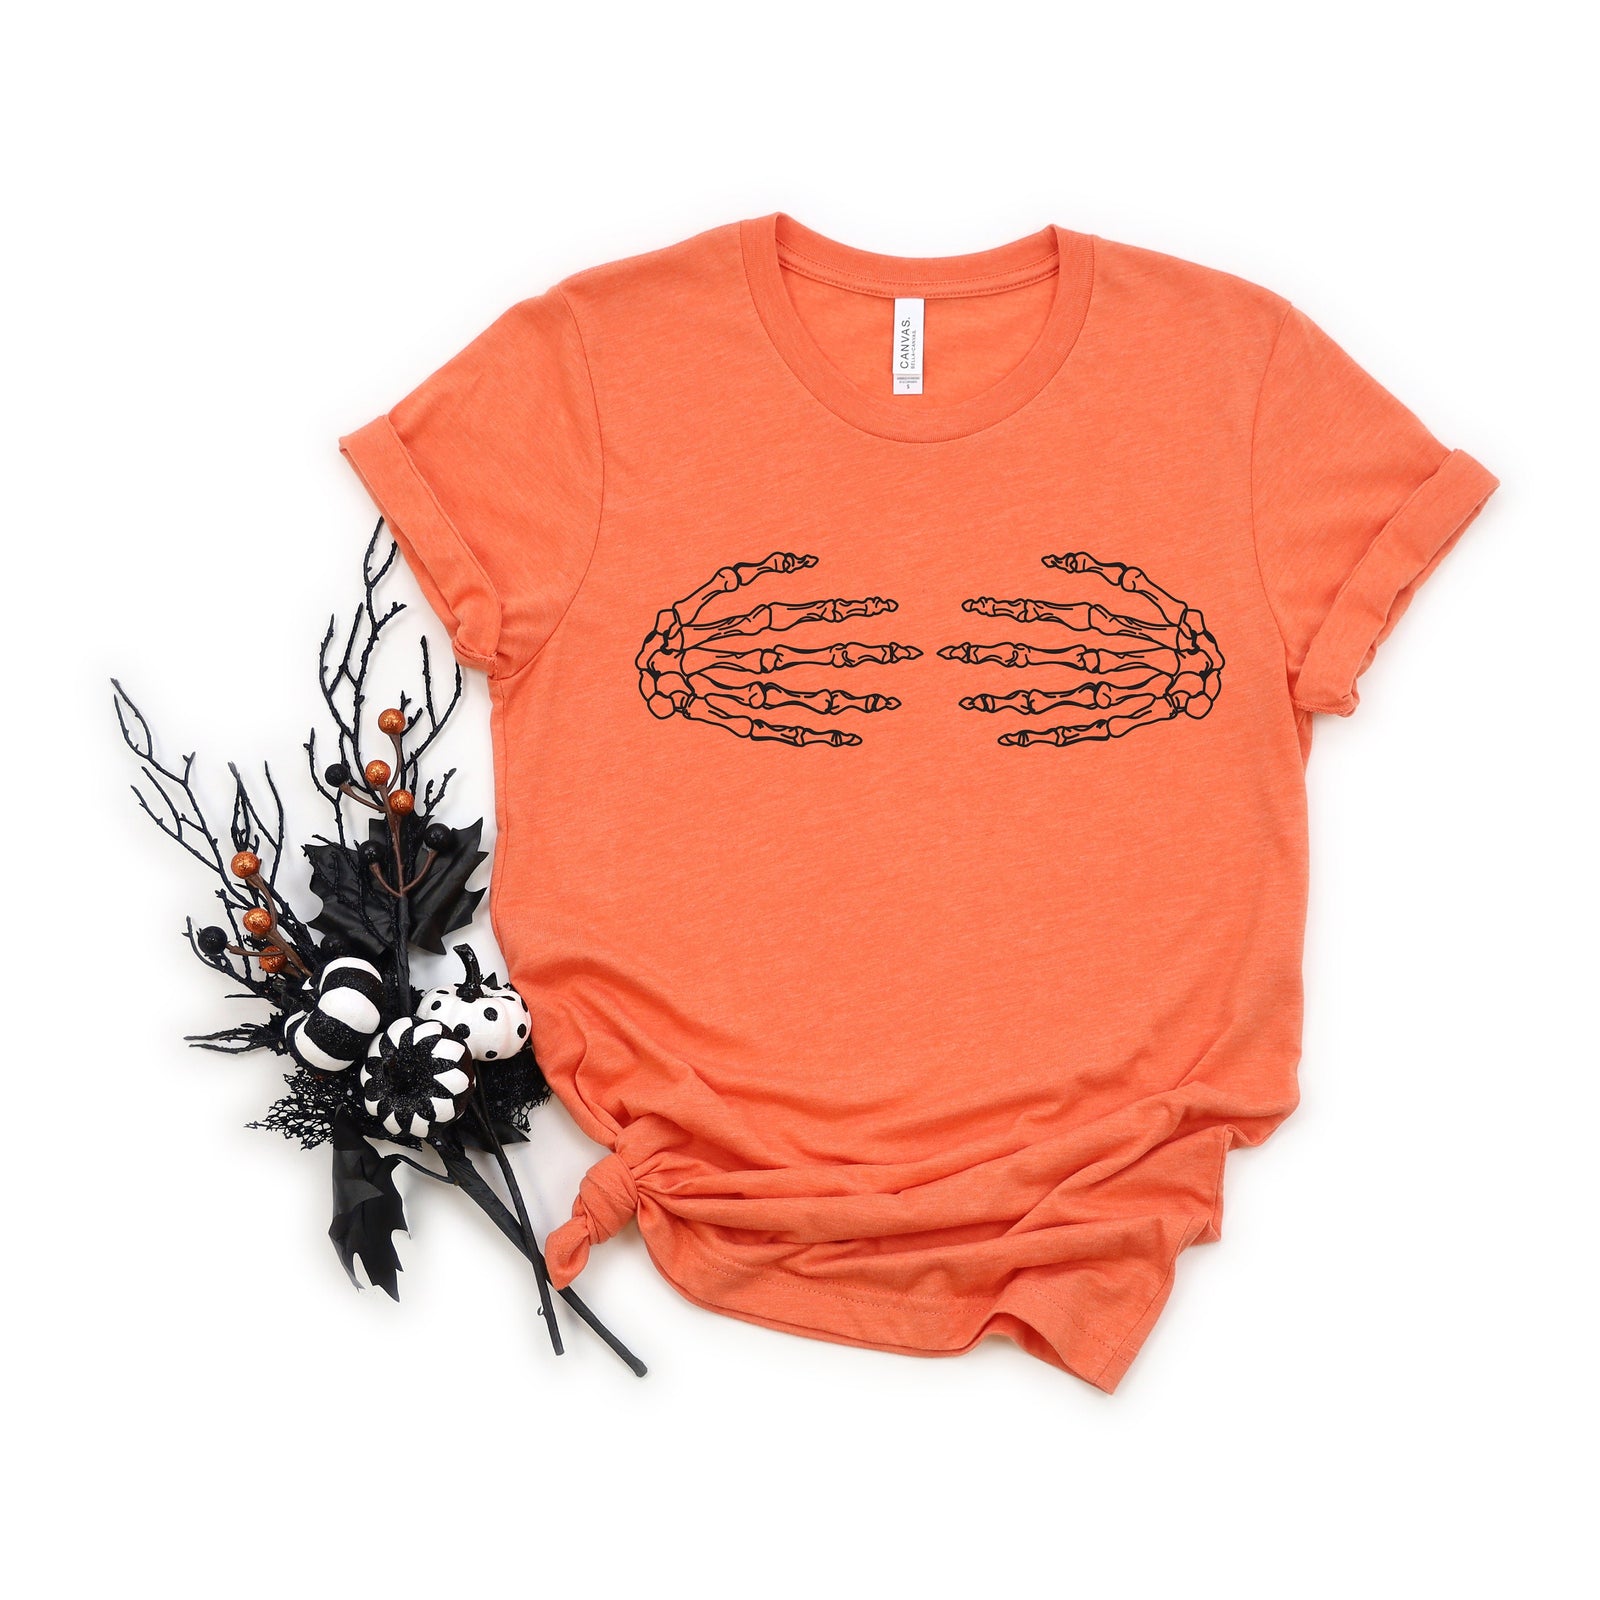 Skeleton Hands Over Boobs Adult Unisex T Shirt - Halloween - Funny Not So Scary Shirts